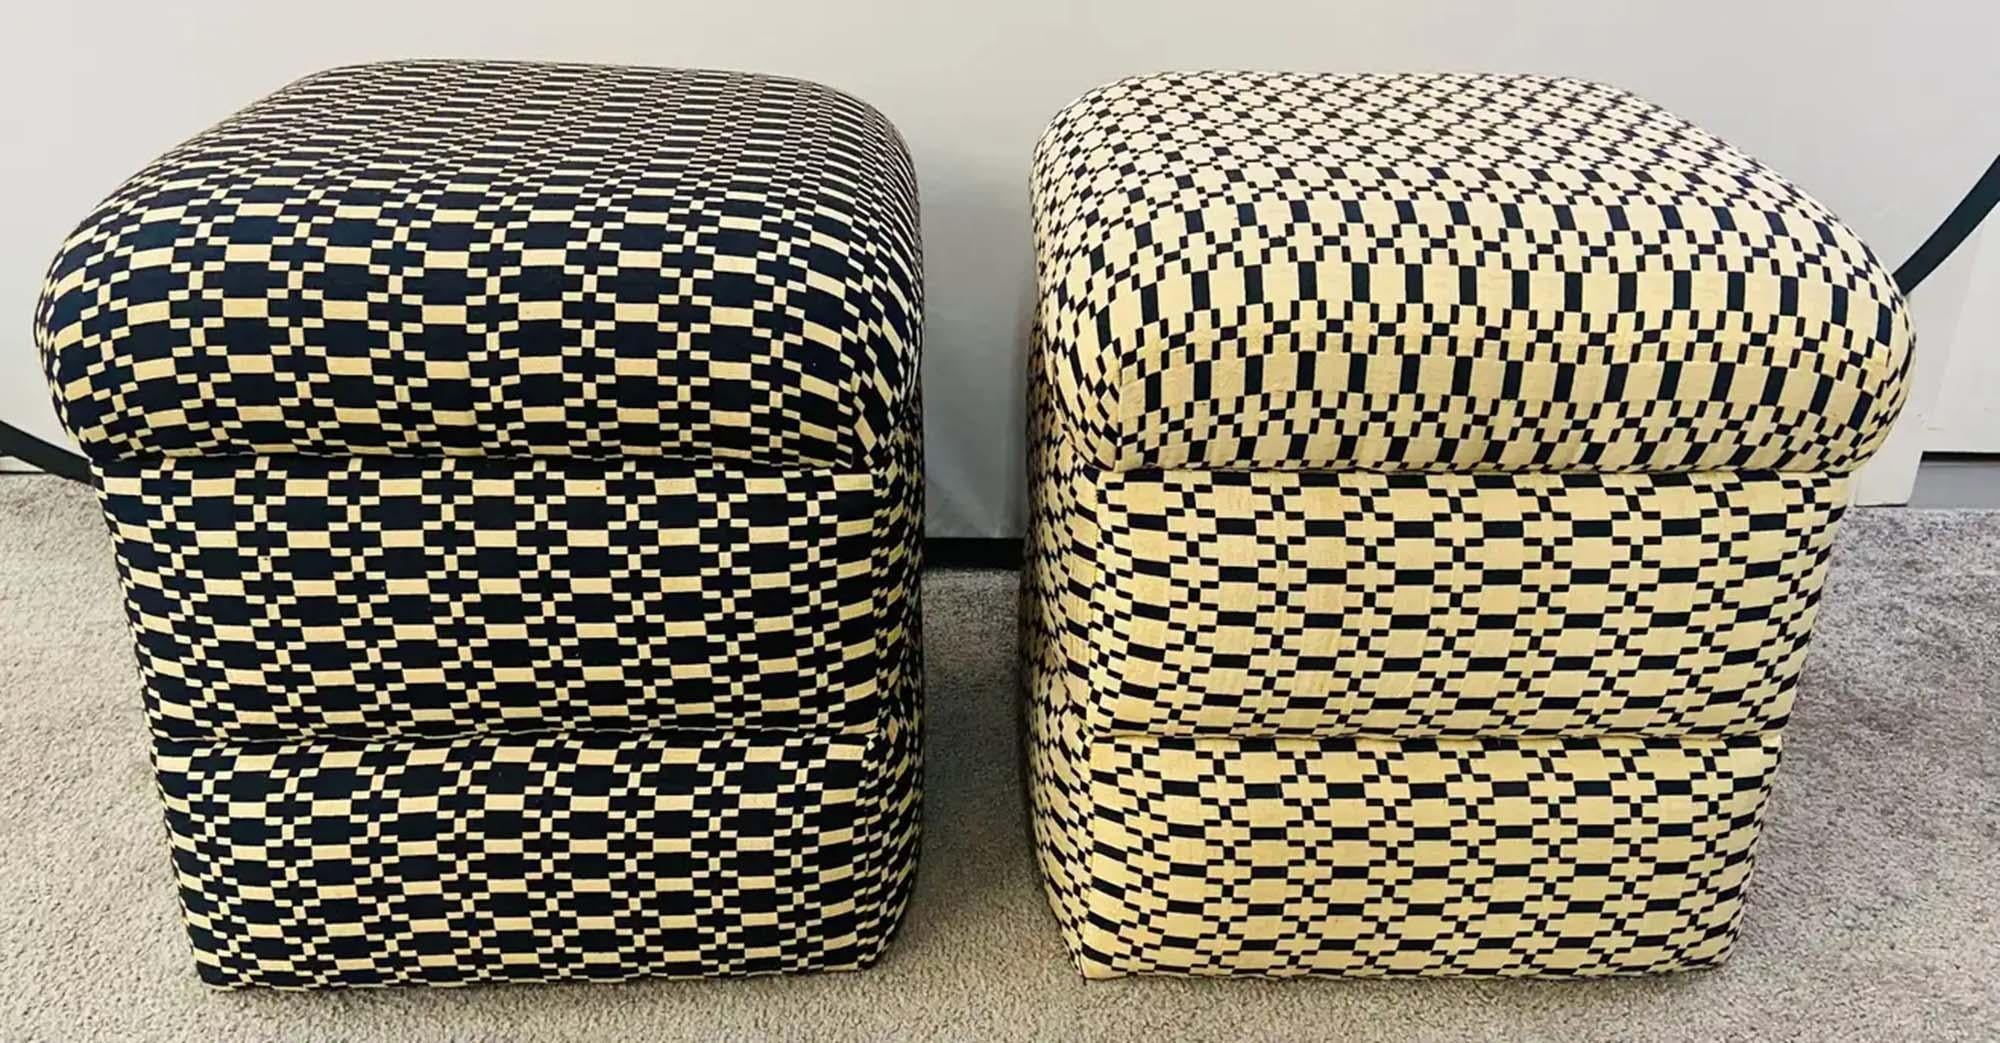 An exquisite pair of Art Deco style cube ottomans or stools. The compatible pair of ottomans are beautifully upholstered and are hand tufted. In addition to featuring stylish geometrical motif in black and beige/ off white, the cube shape creates a